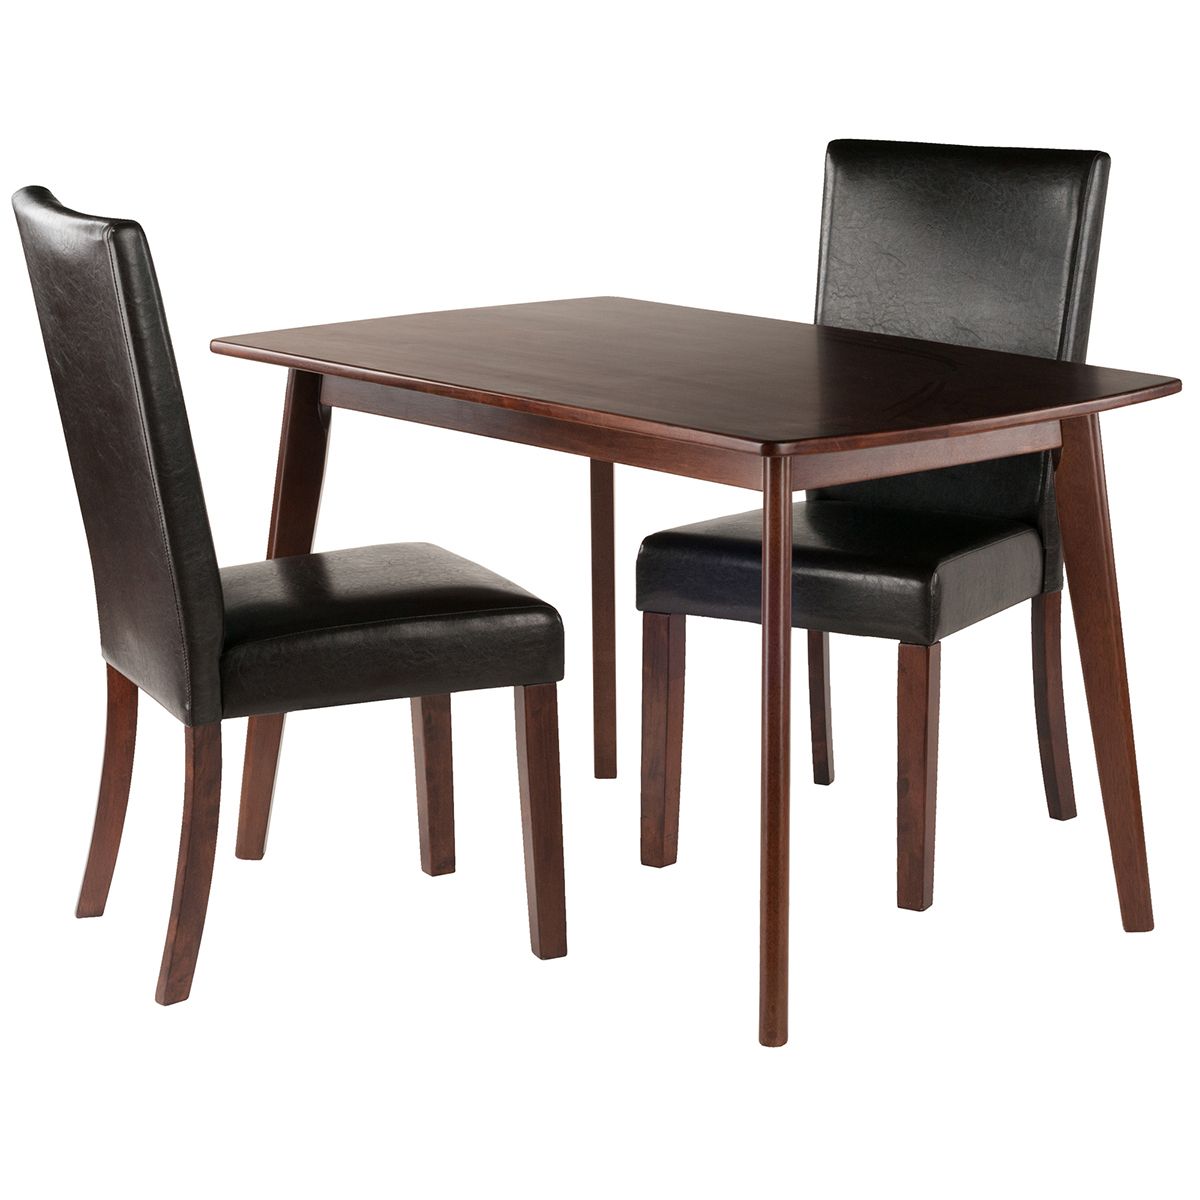 Popular Winsome Shaye Johnson 3 Piece Dining Set Walnut Espresso Within Johnson Round Pedestal Dining Tables (View 12 of 25)